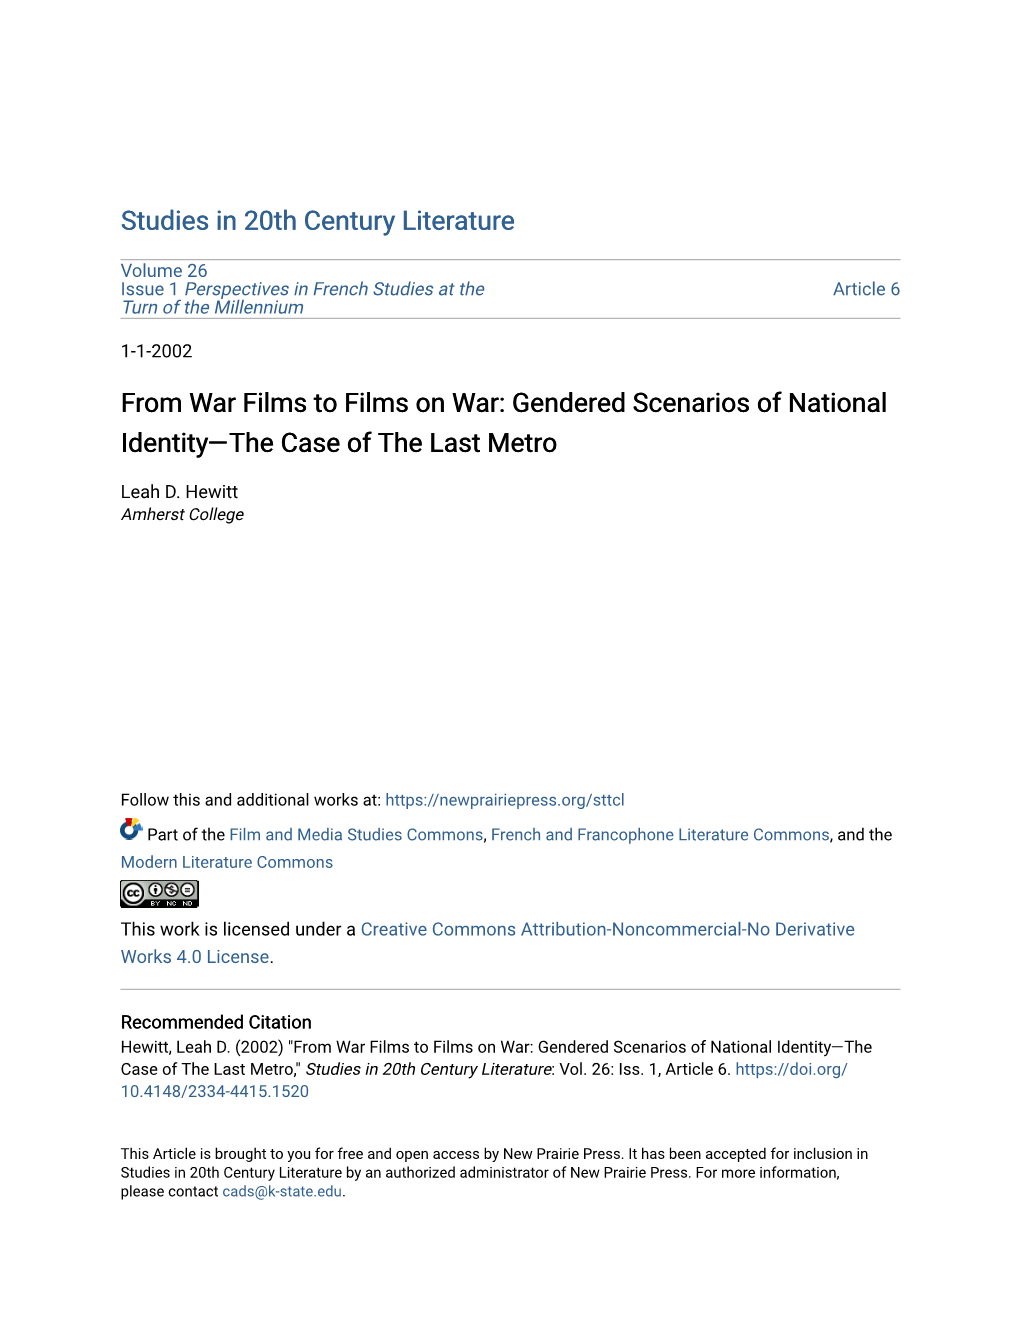 From War Films to Films on War: Gendered Scenarios of National Identity—The Case of the Last Metro